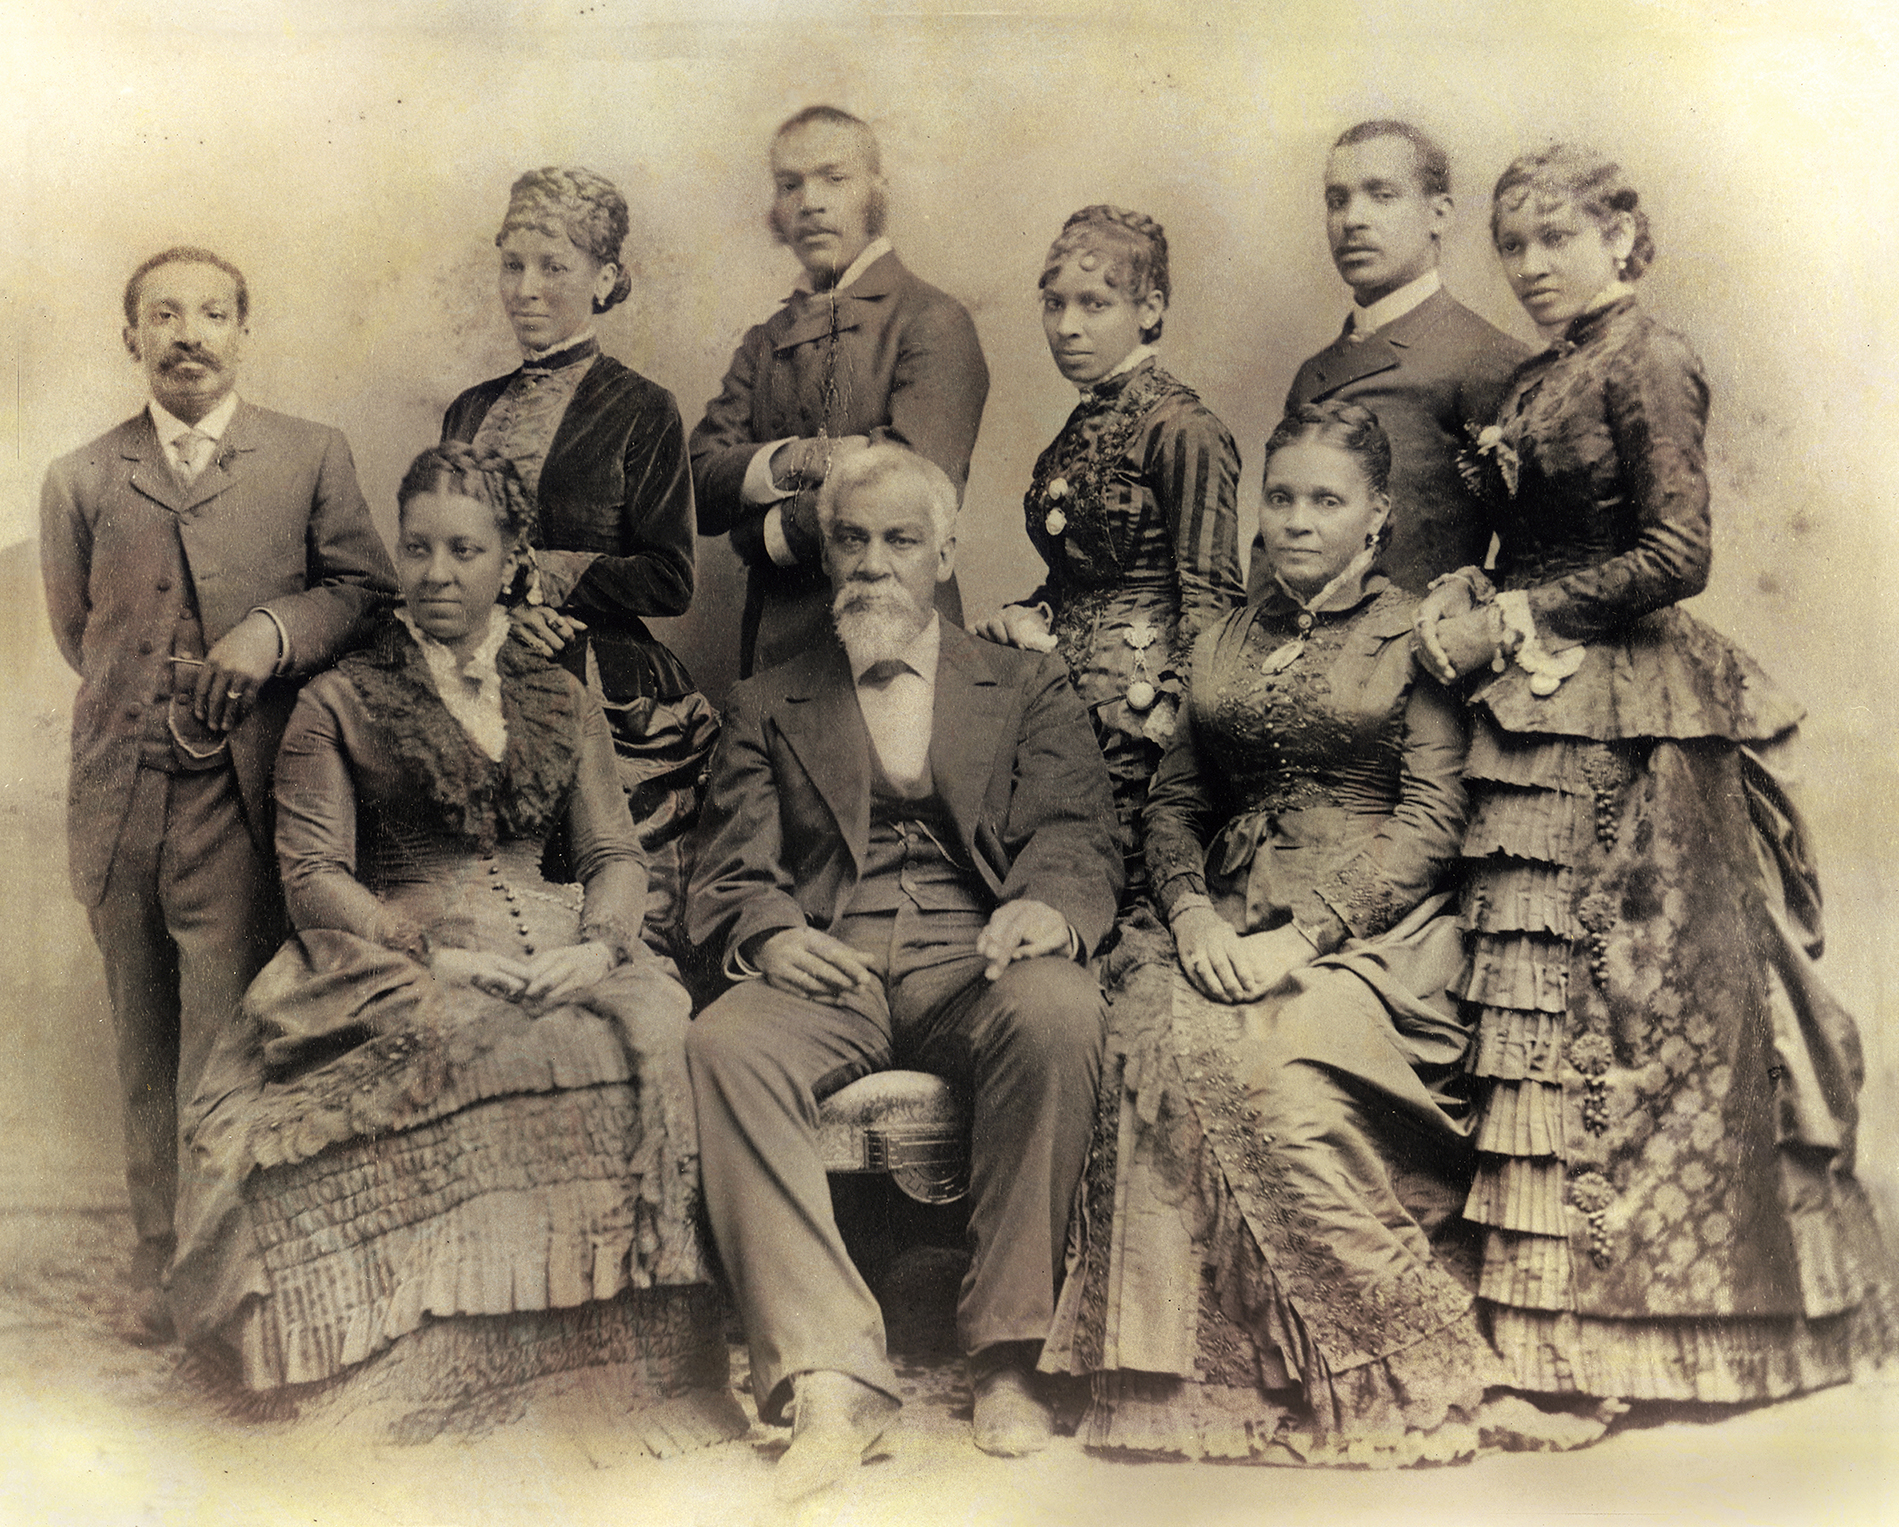 A 19th Century Black Success Story: The Downing Family